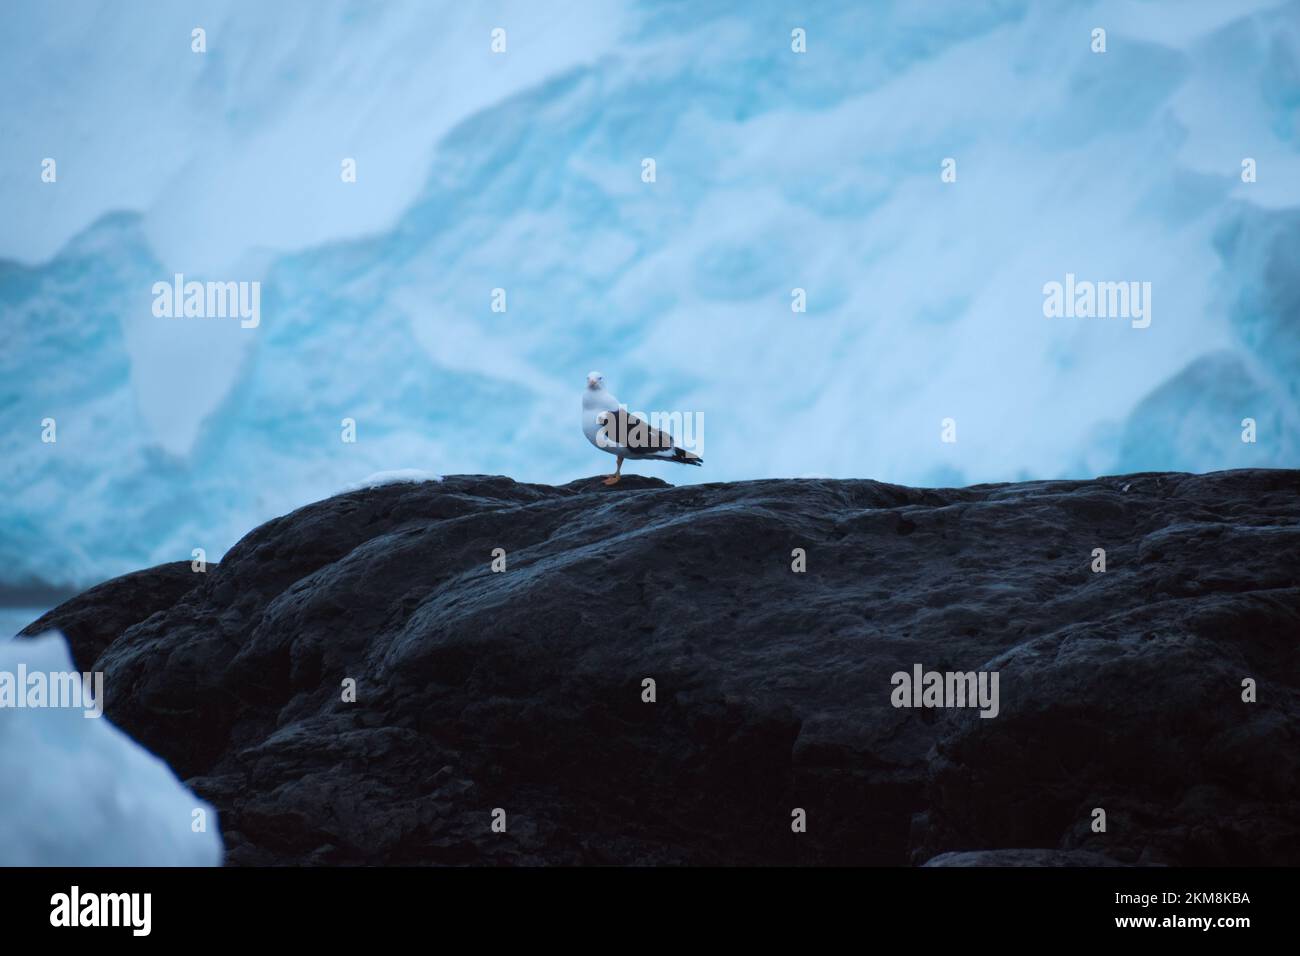 A single gull bird on the rocky cost of Antarctica with a glacier behind it. Stock Photo